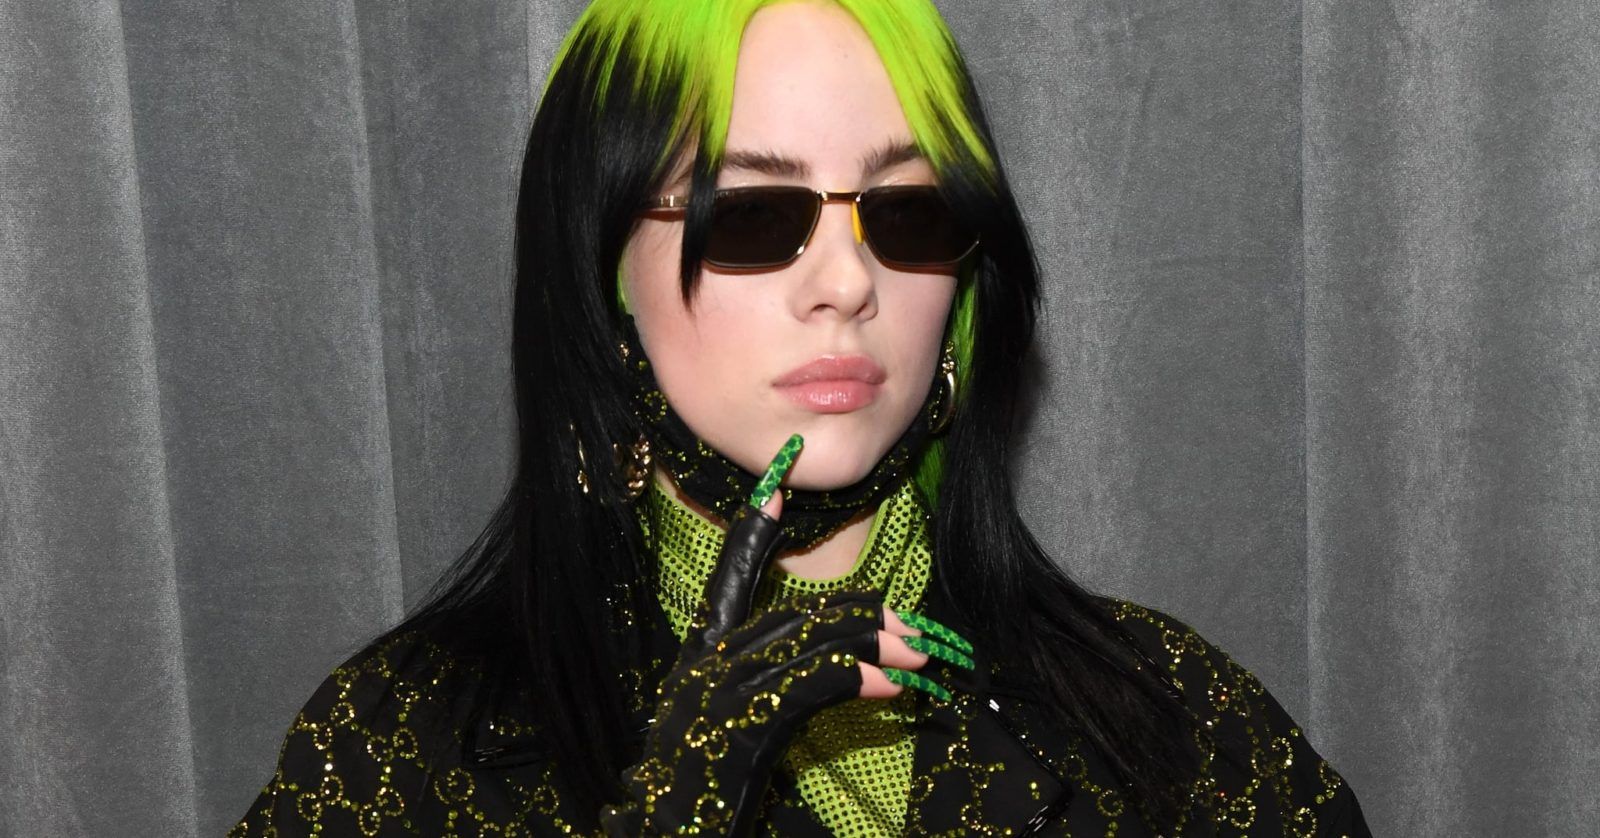 Billie Eilish, Jennifer Lopez, and more celebrity outfits that went viral in 2020